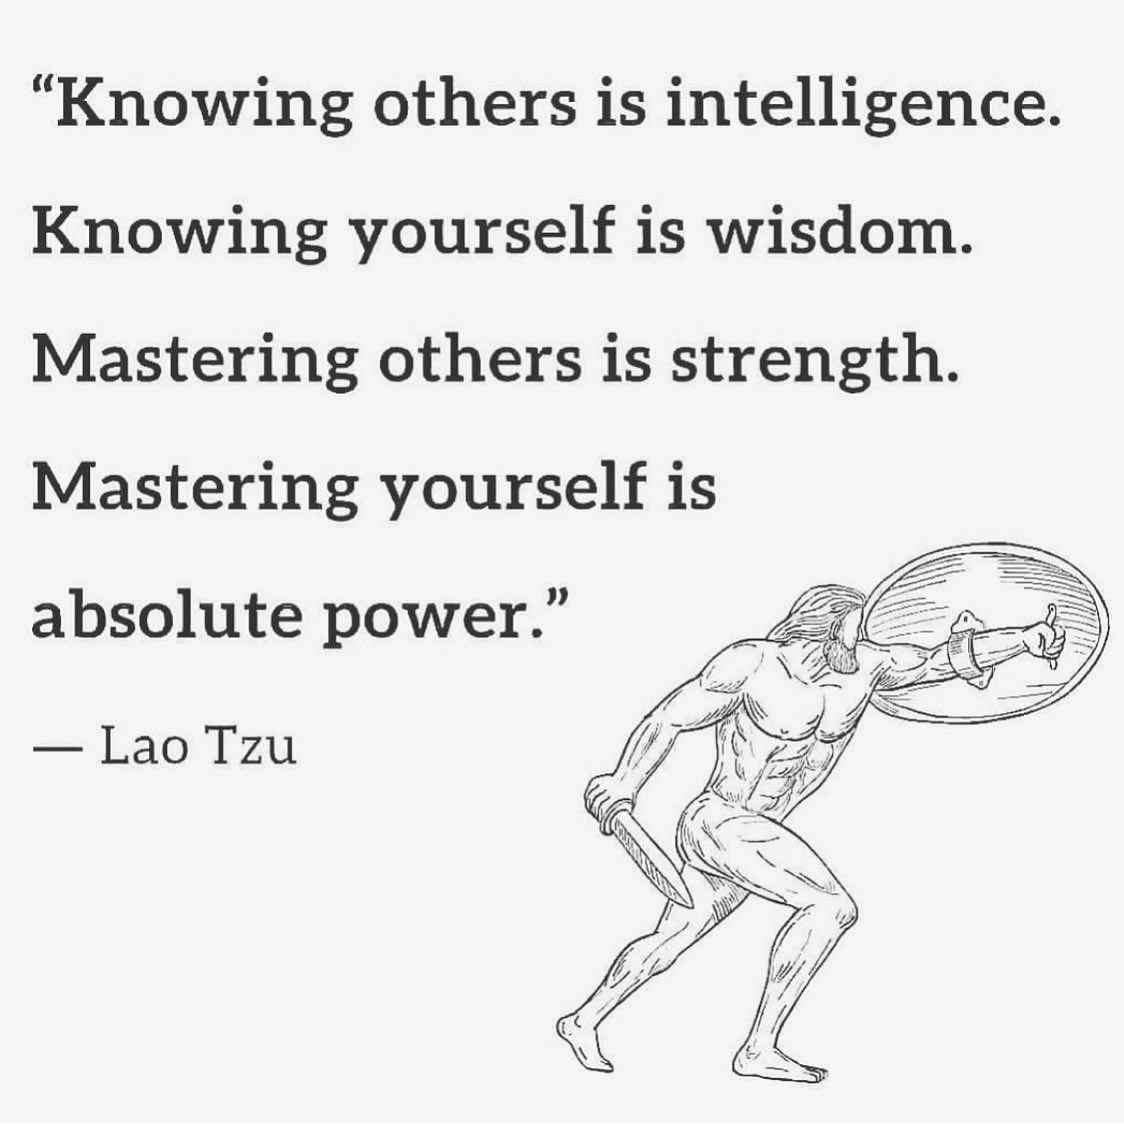 "Knowing others is intelligence. Knowing yourself is wisdom. Mastering others is strength. Mastering yourself is absolute power. Lao Tzu.